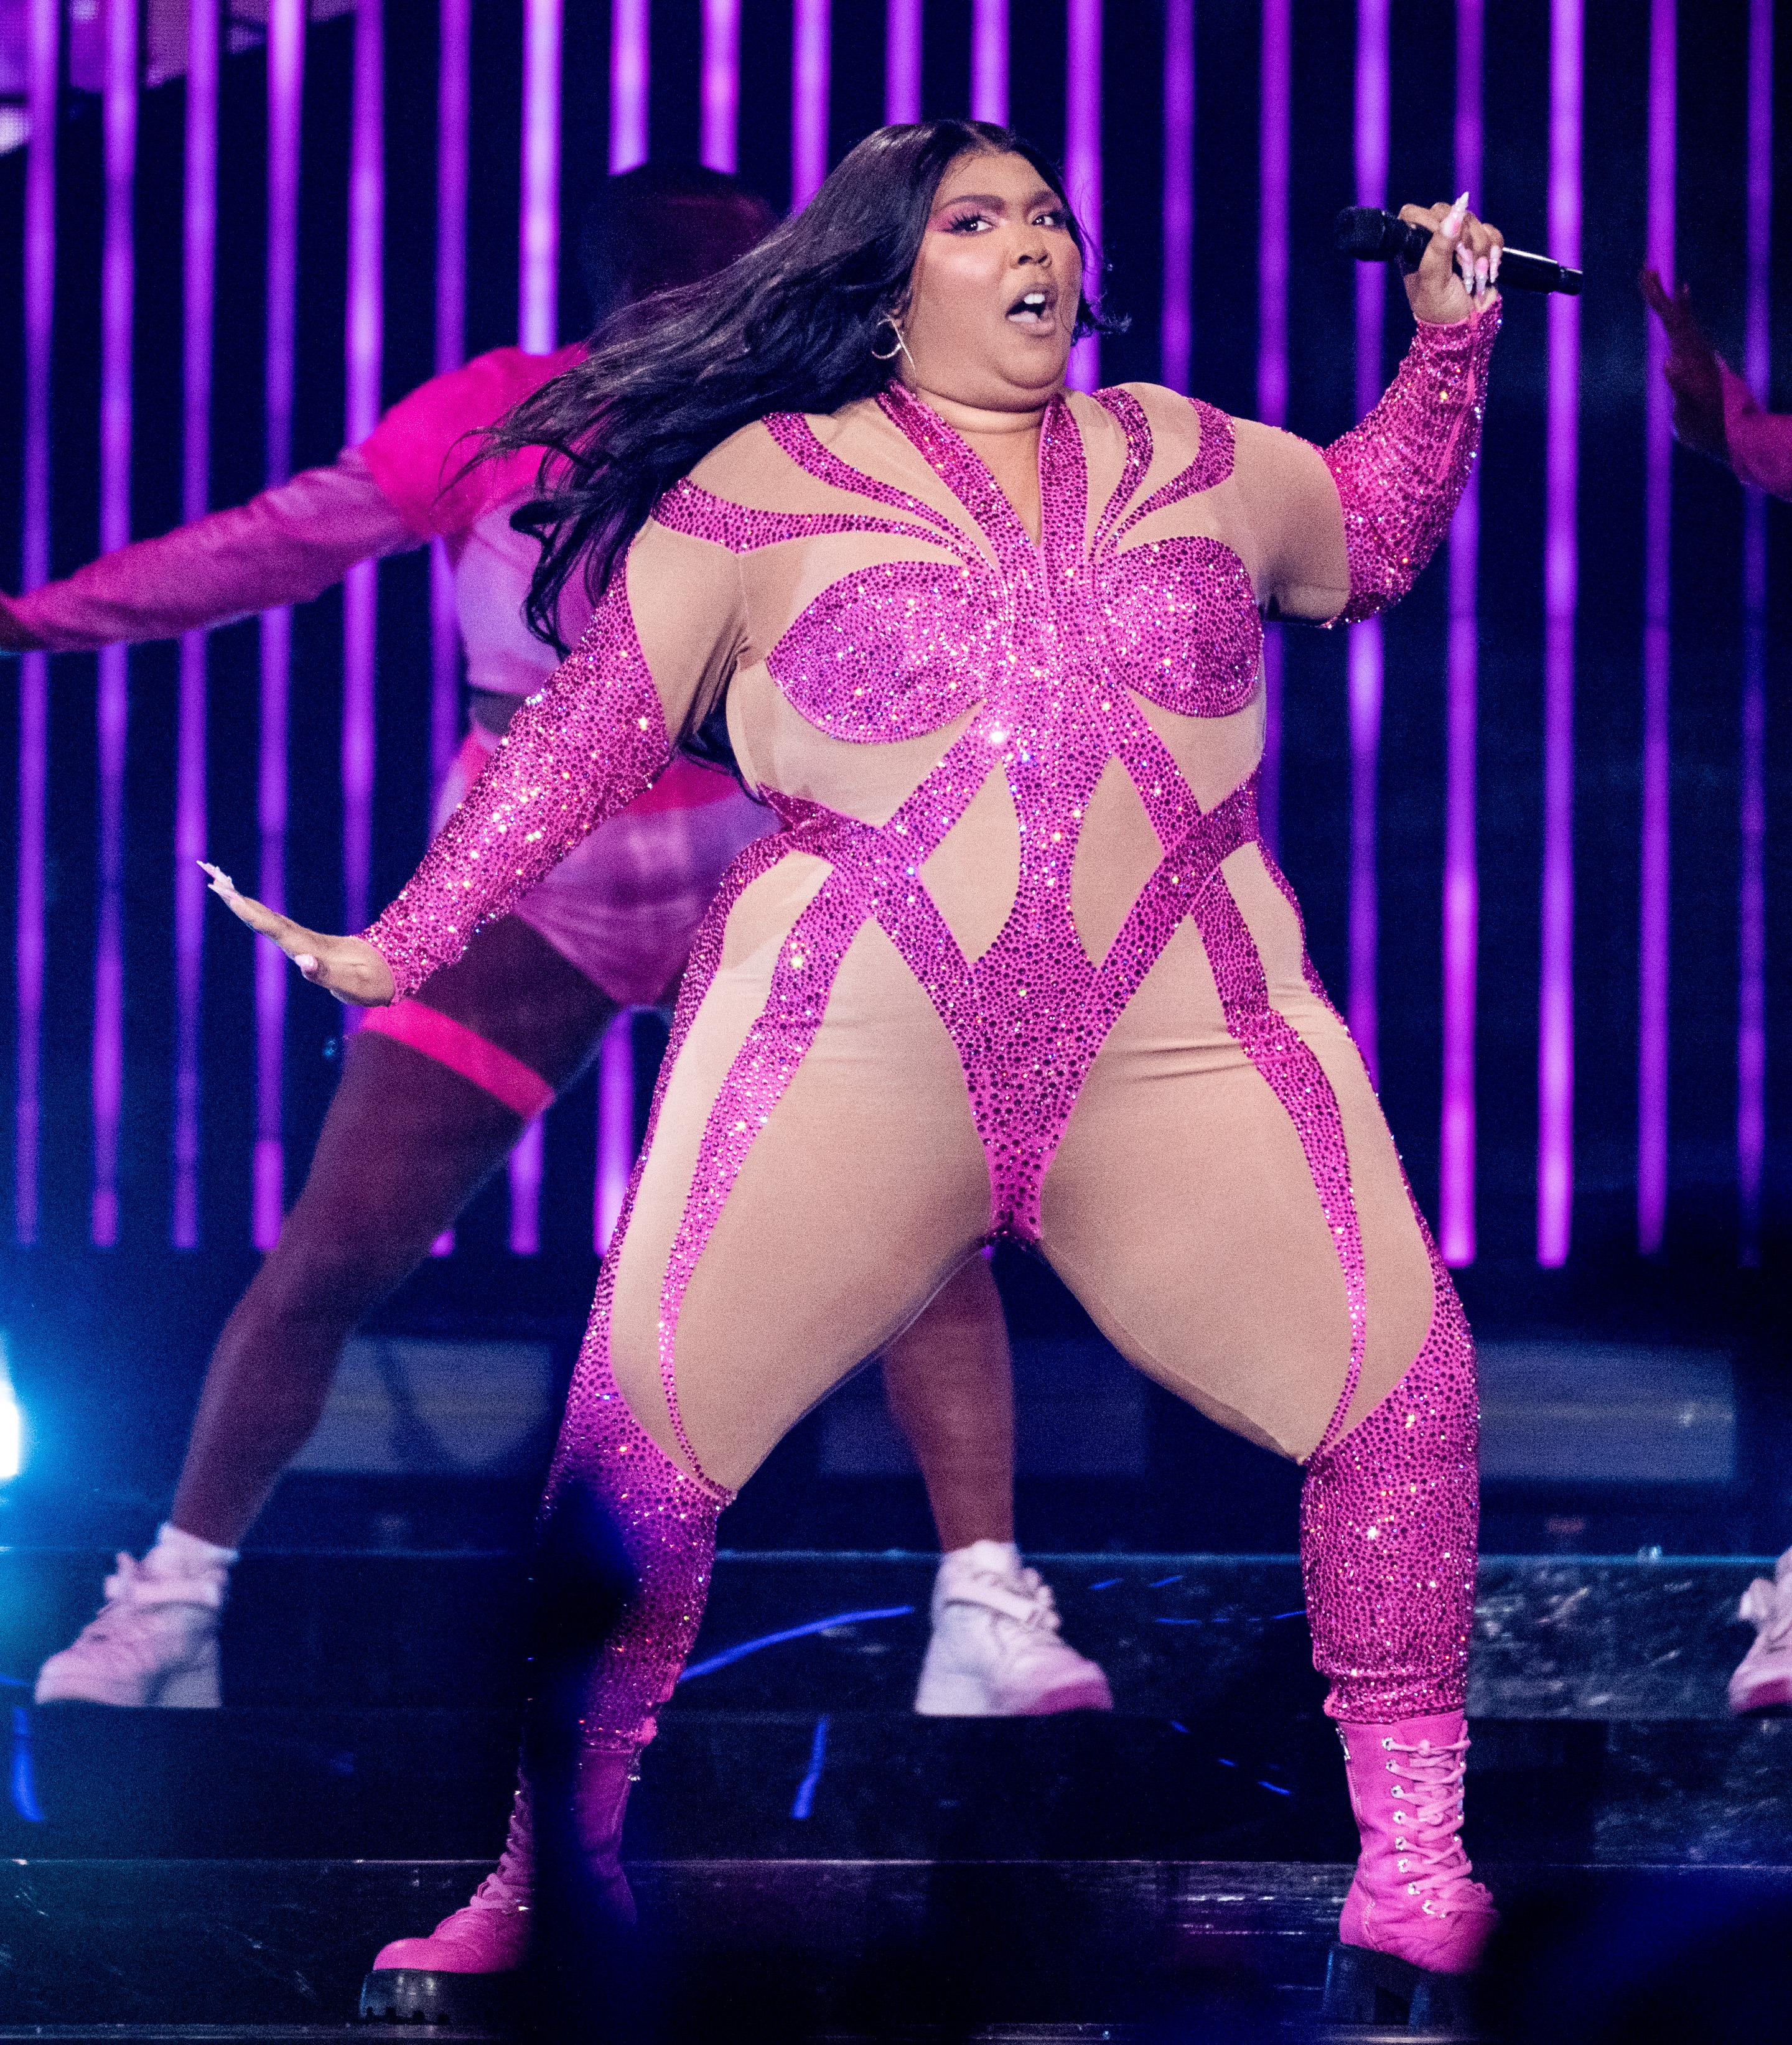 Plus-size celebs, like rapper Lizzo, help push the 'completely invented idea' that you can be fat and fit